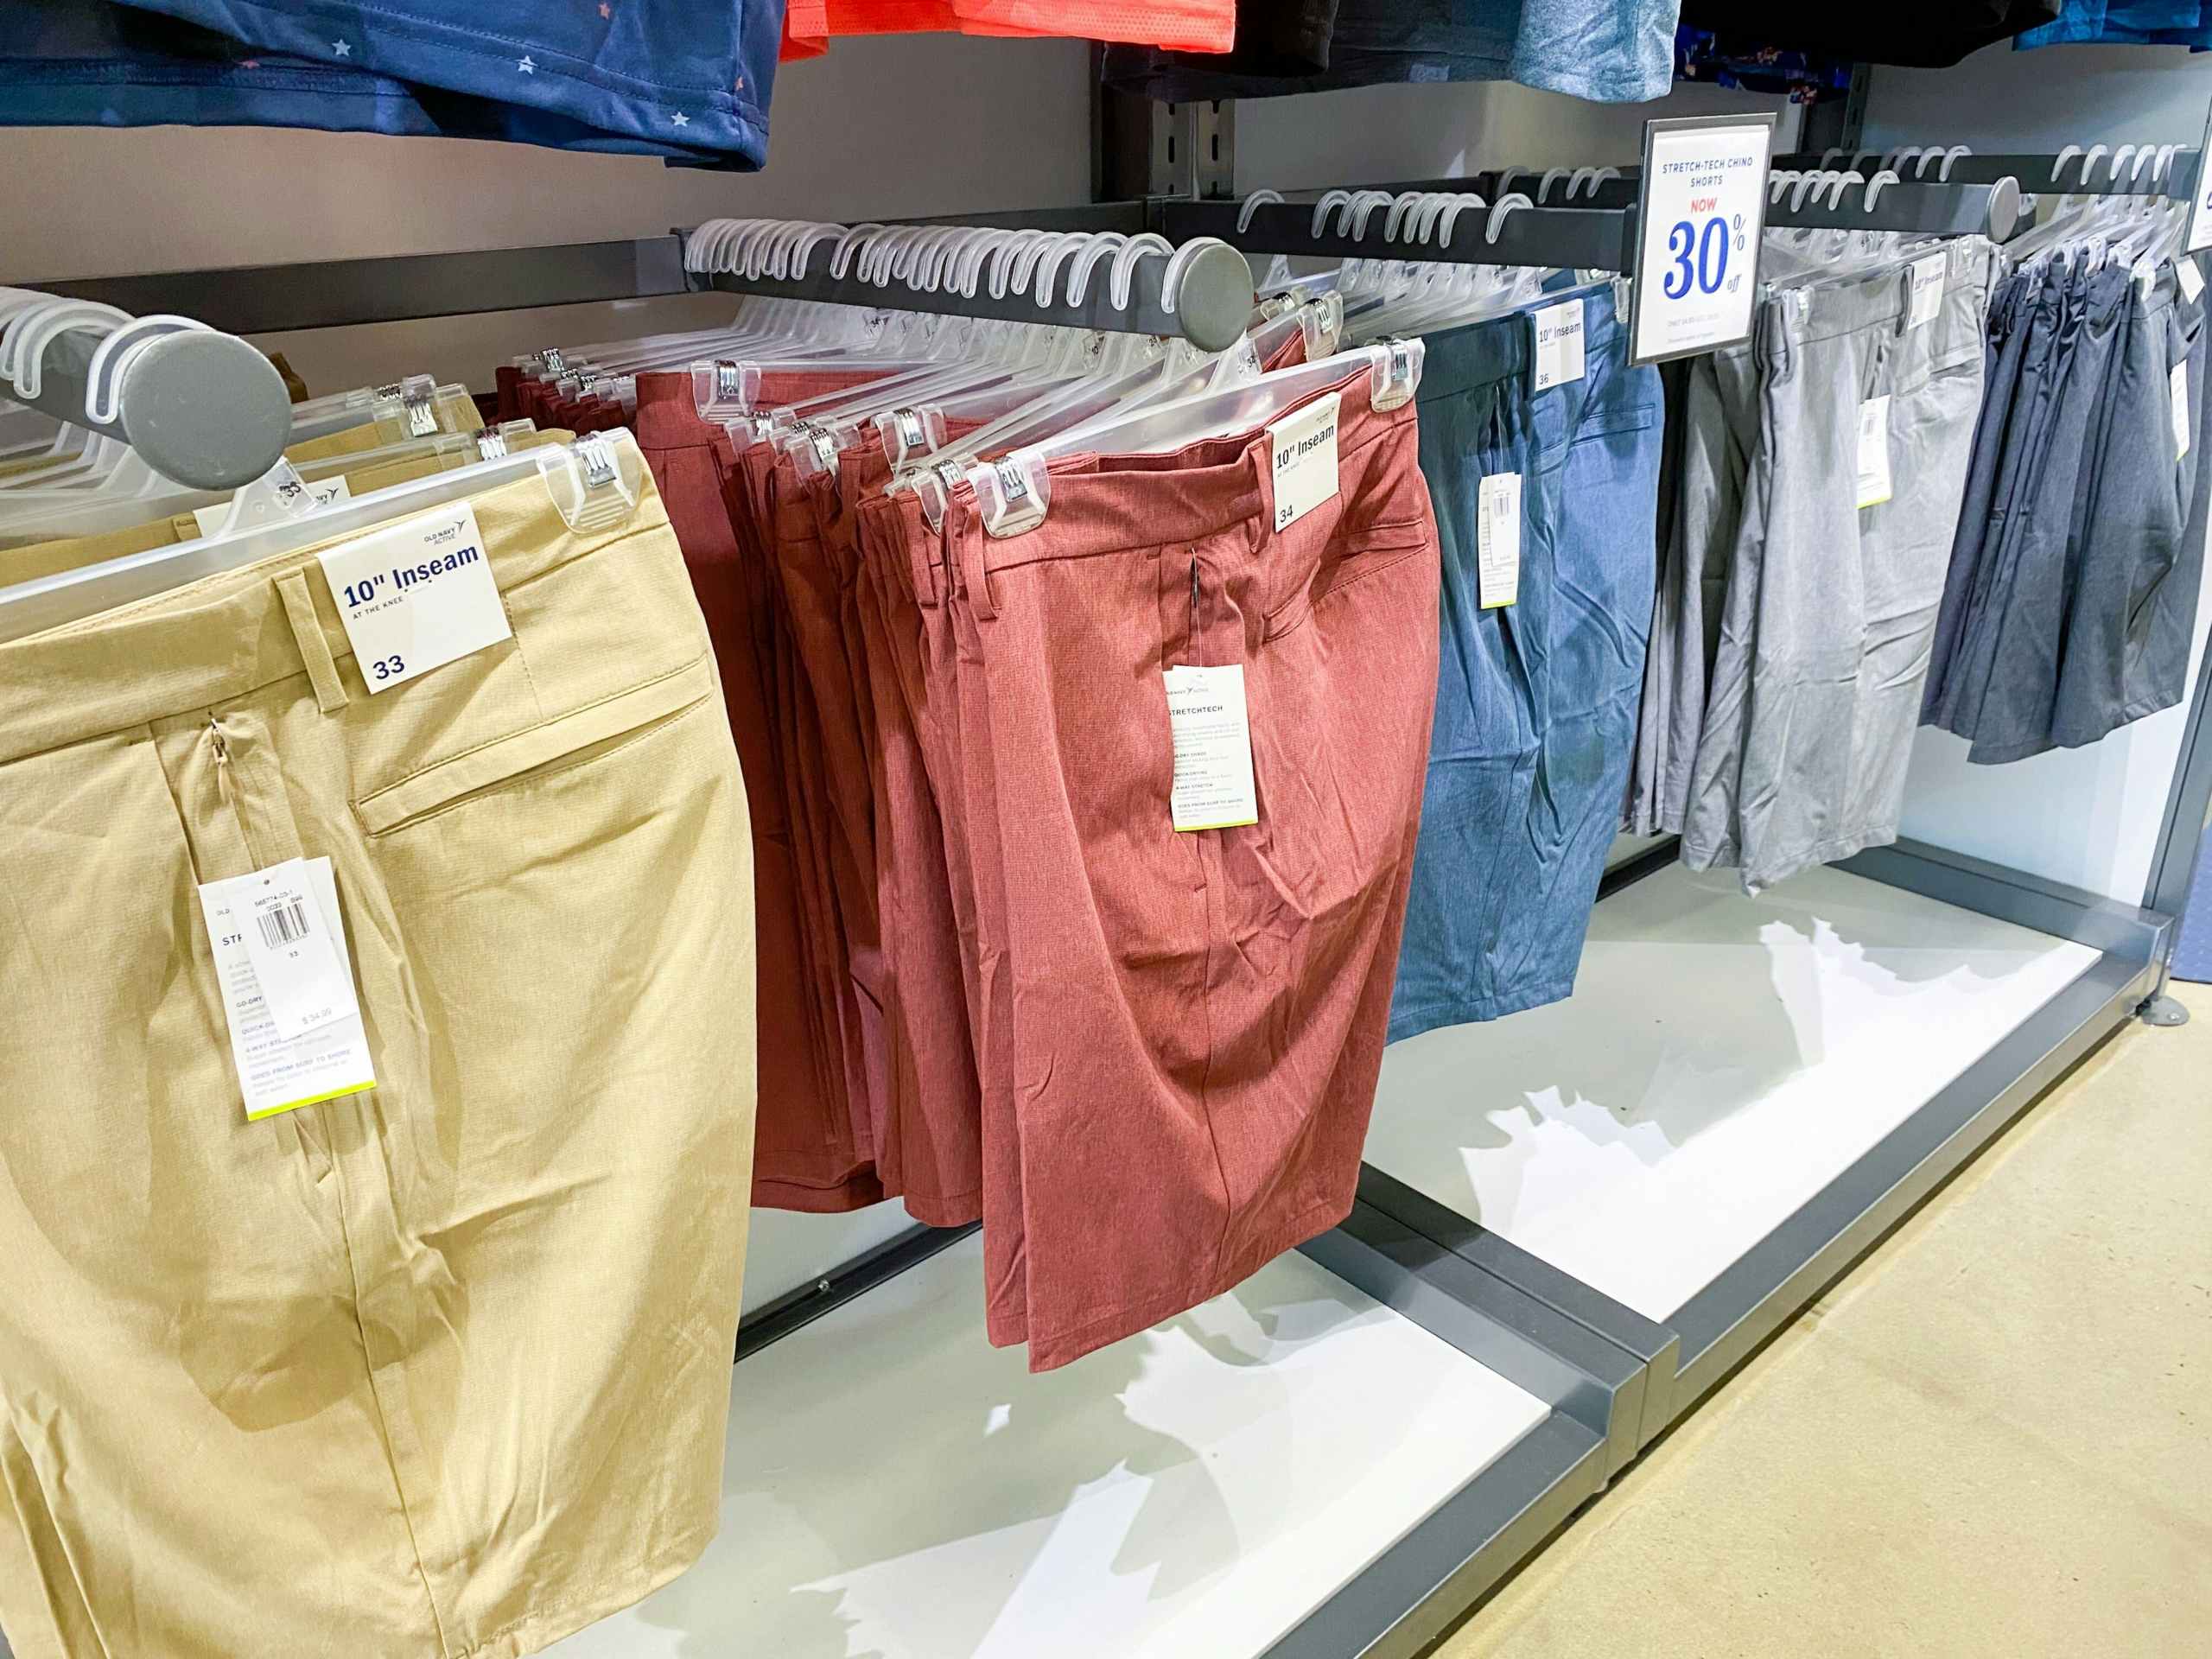 old navy boys shorts in store image 2021 3